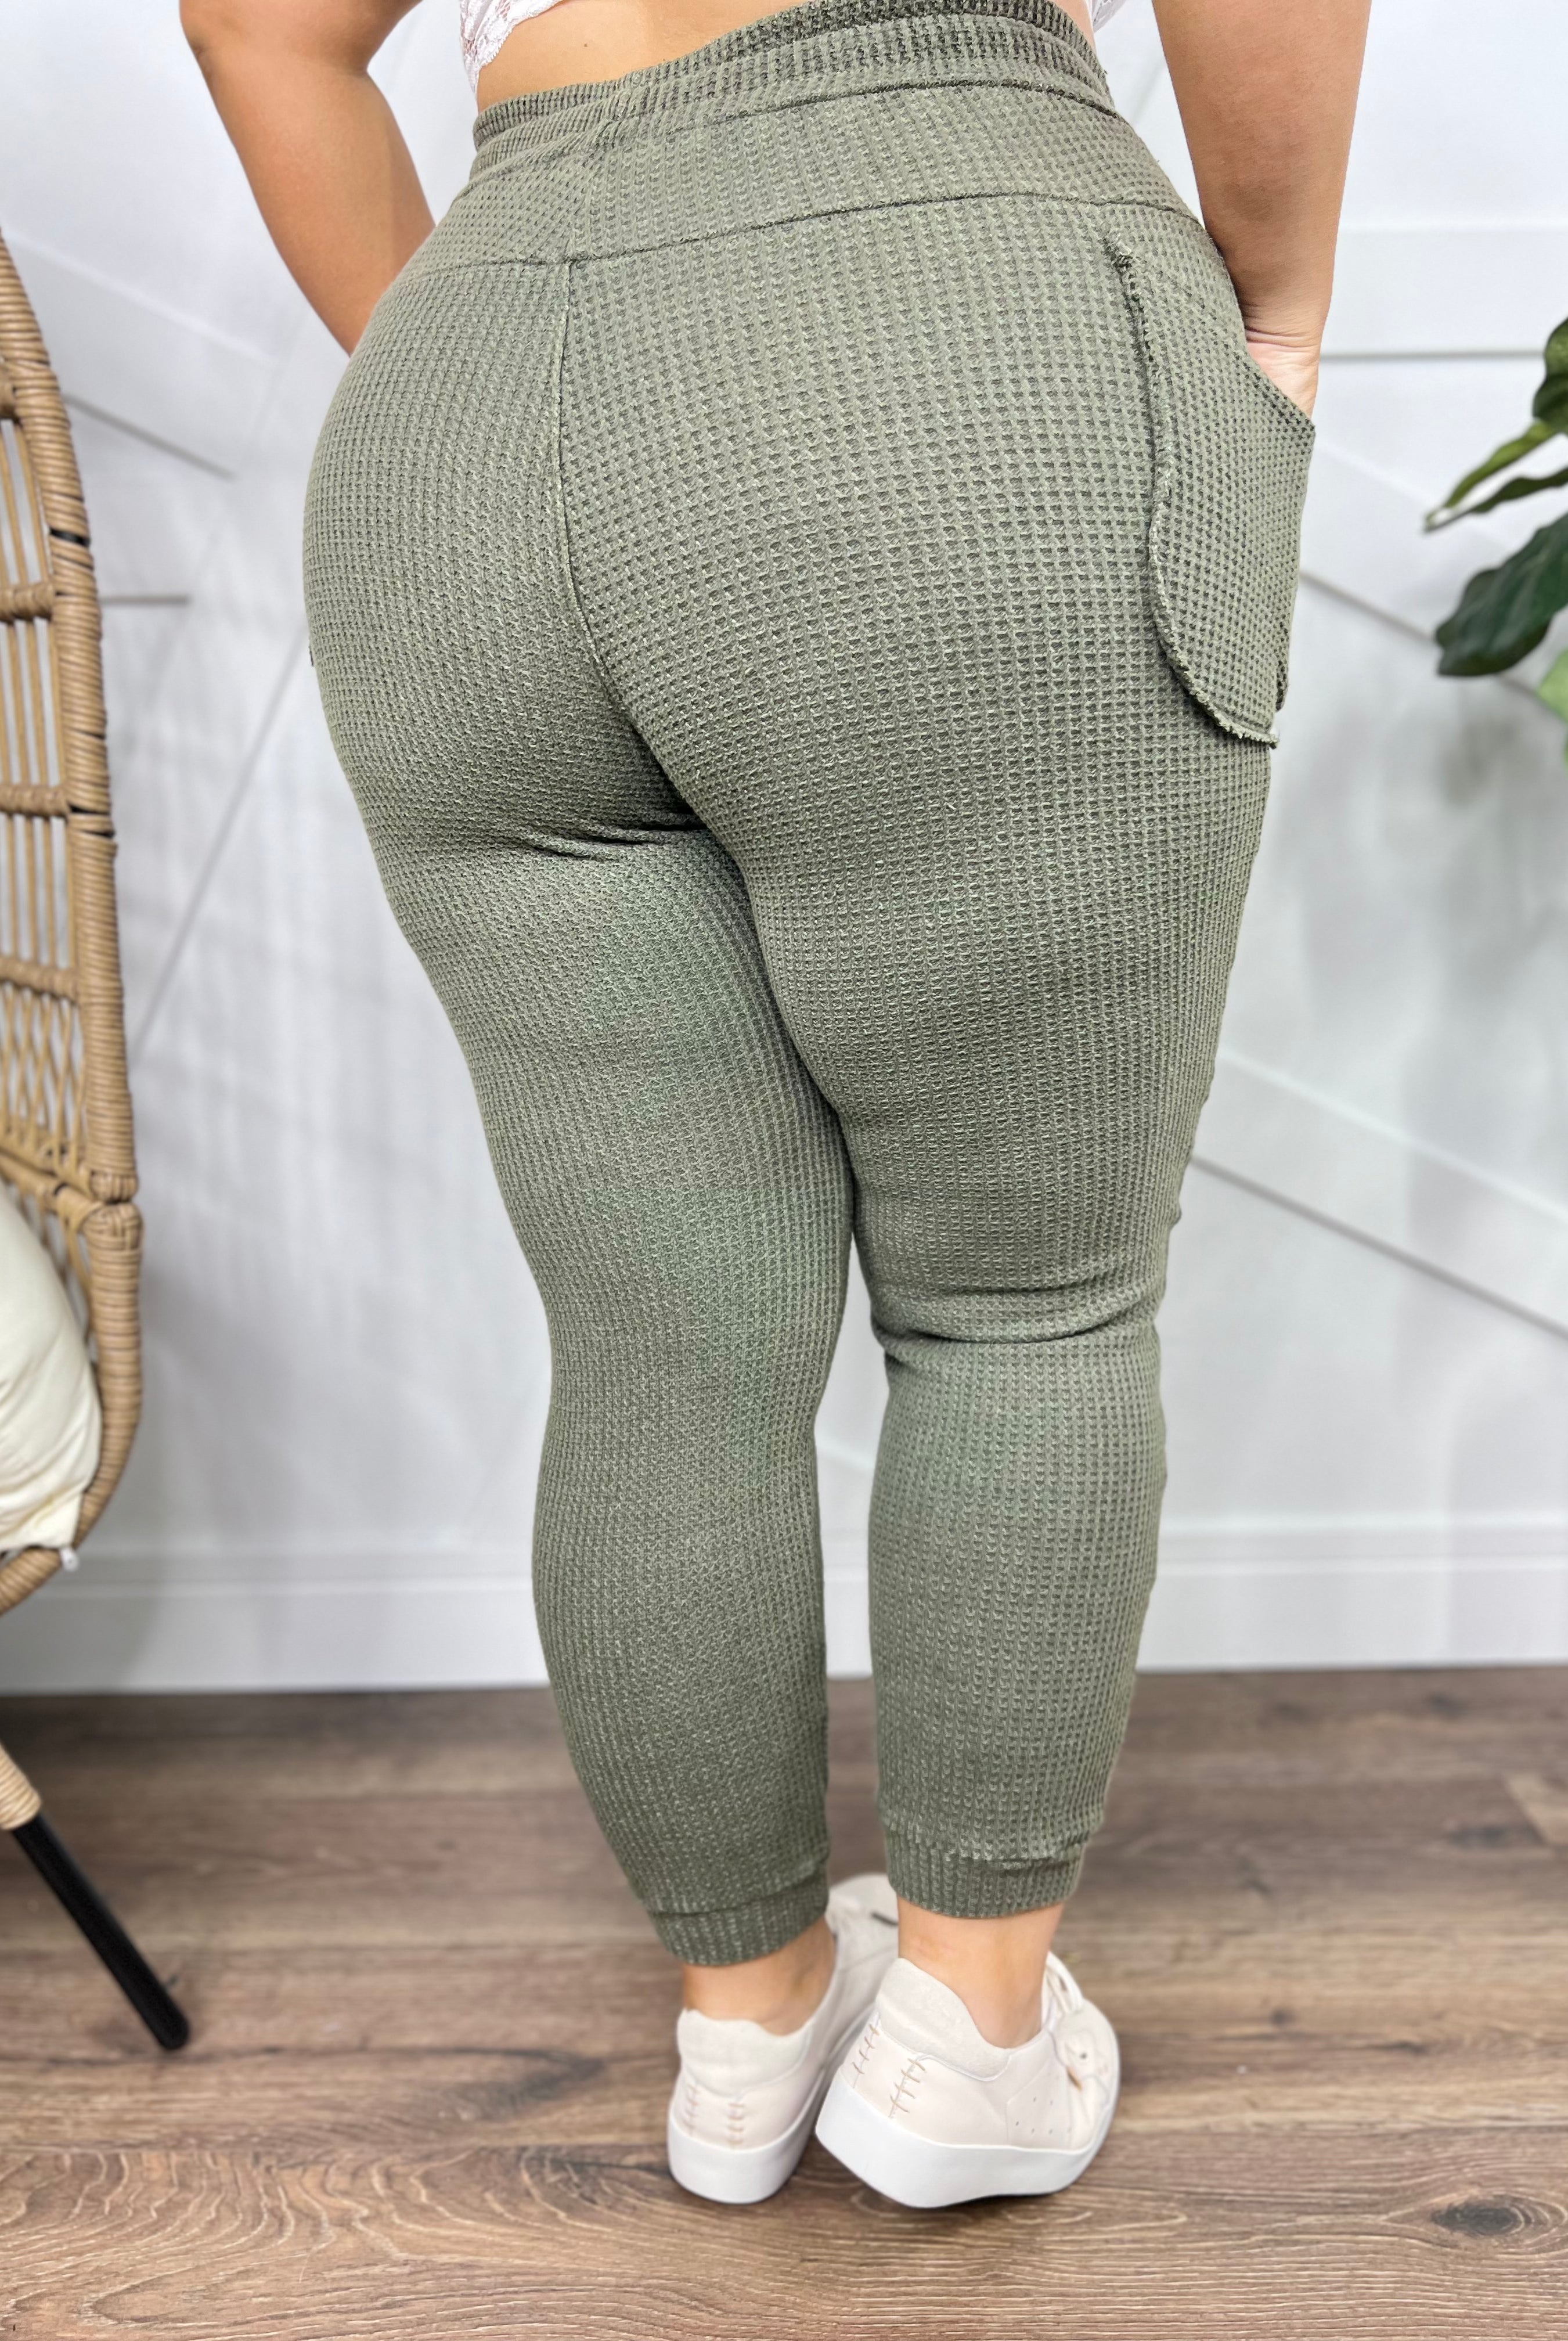 RESTOCK: Daily Lounge Jogger Pants-150 PANTS-Rae Mode-Heathered Boho Boutique, Women's Fashion and Accessories in Palmetto, FL